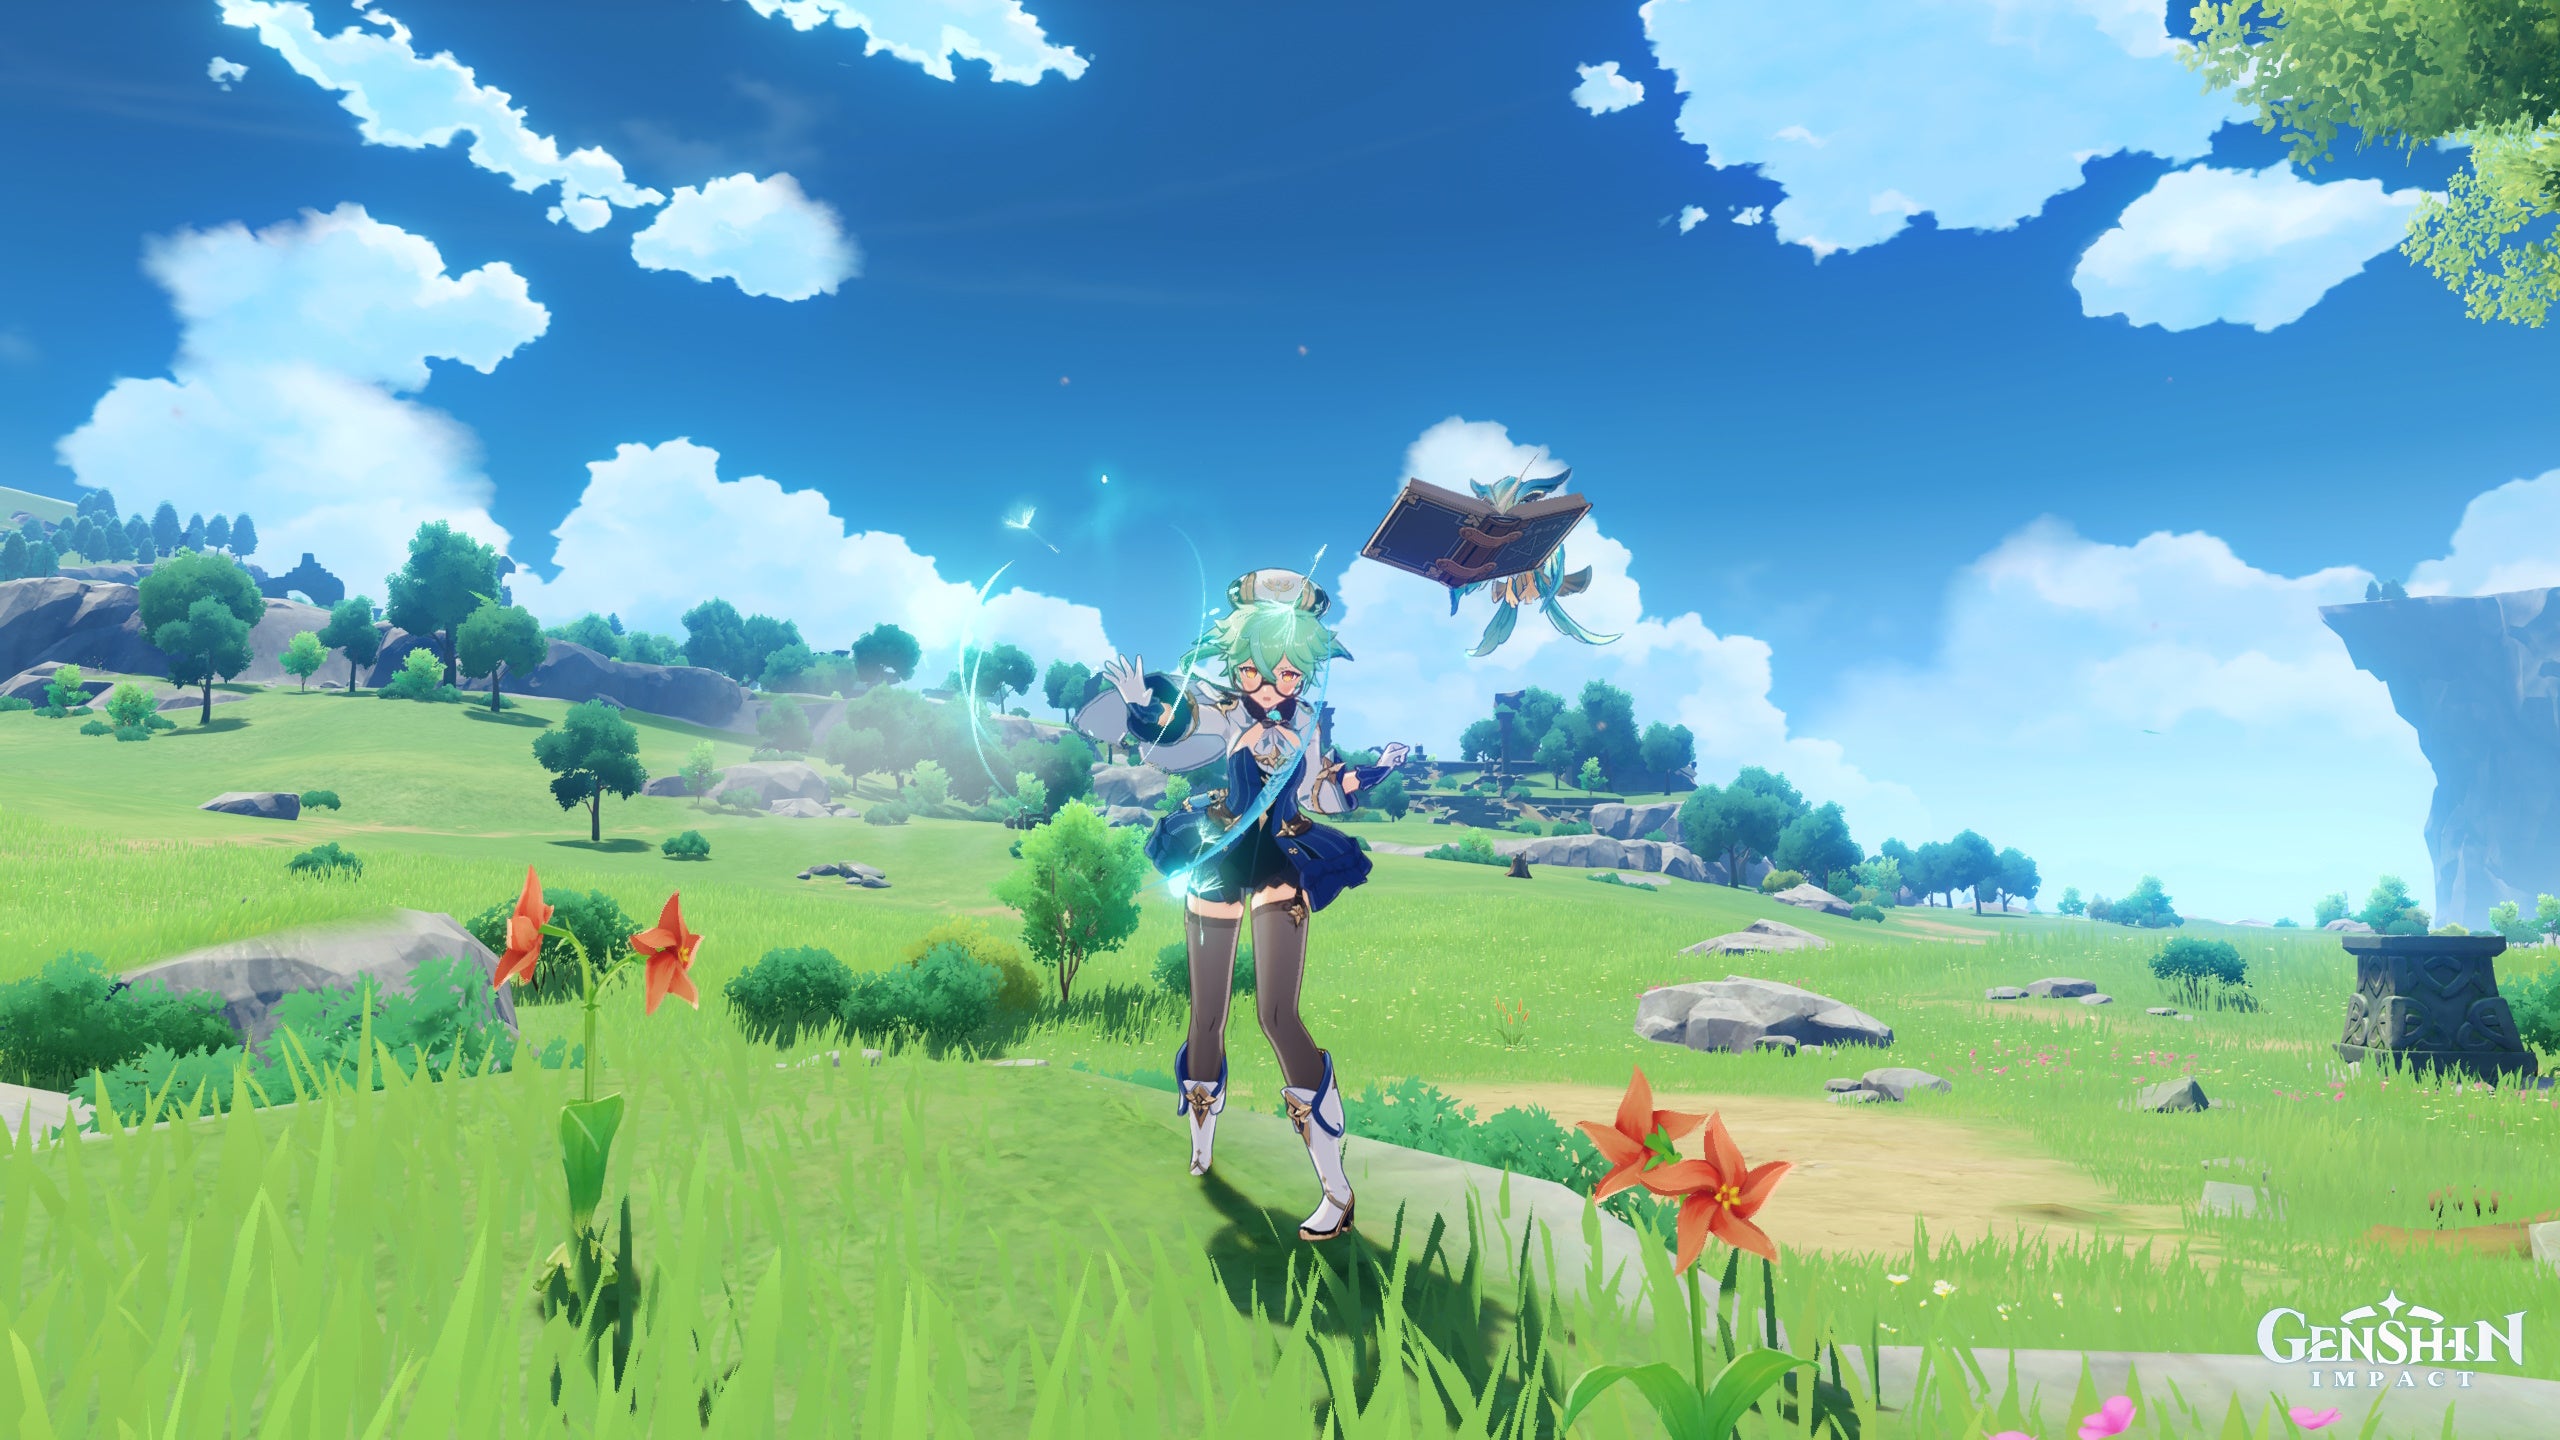 Genshin Impact Sucrose materials: An anime girl with short green hair, wearing a blue and white cap and onesie, is standing in the middle of a vibrant green field. Flowers surround her, and she's creating a small green whirlwind with her right hand.